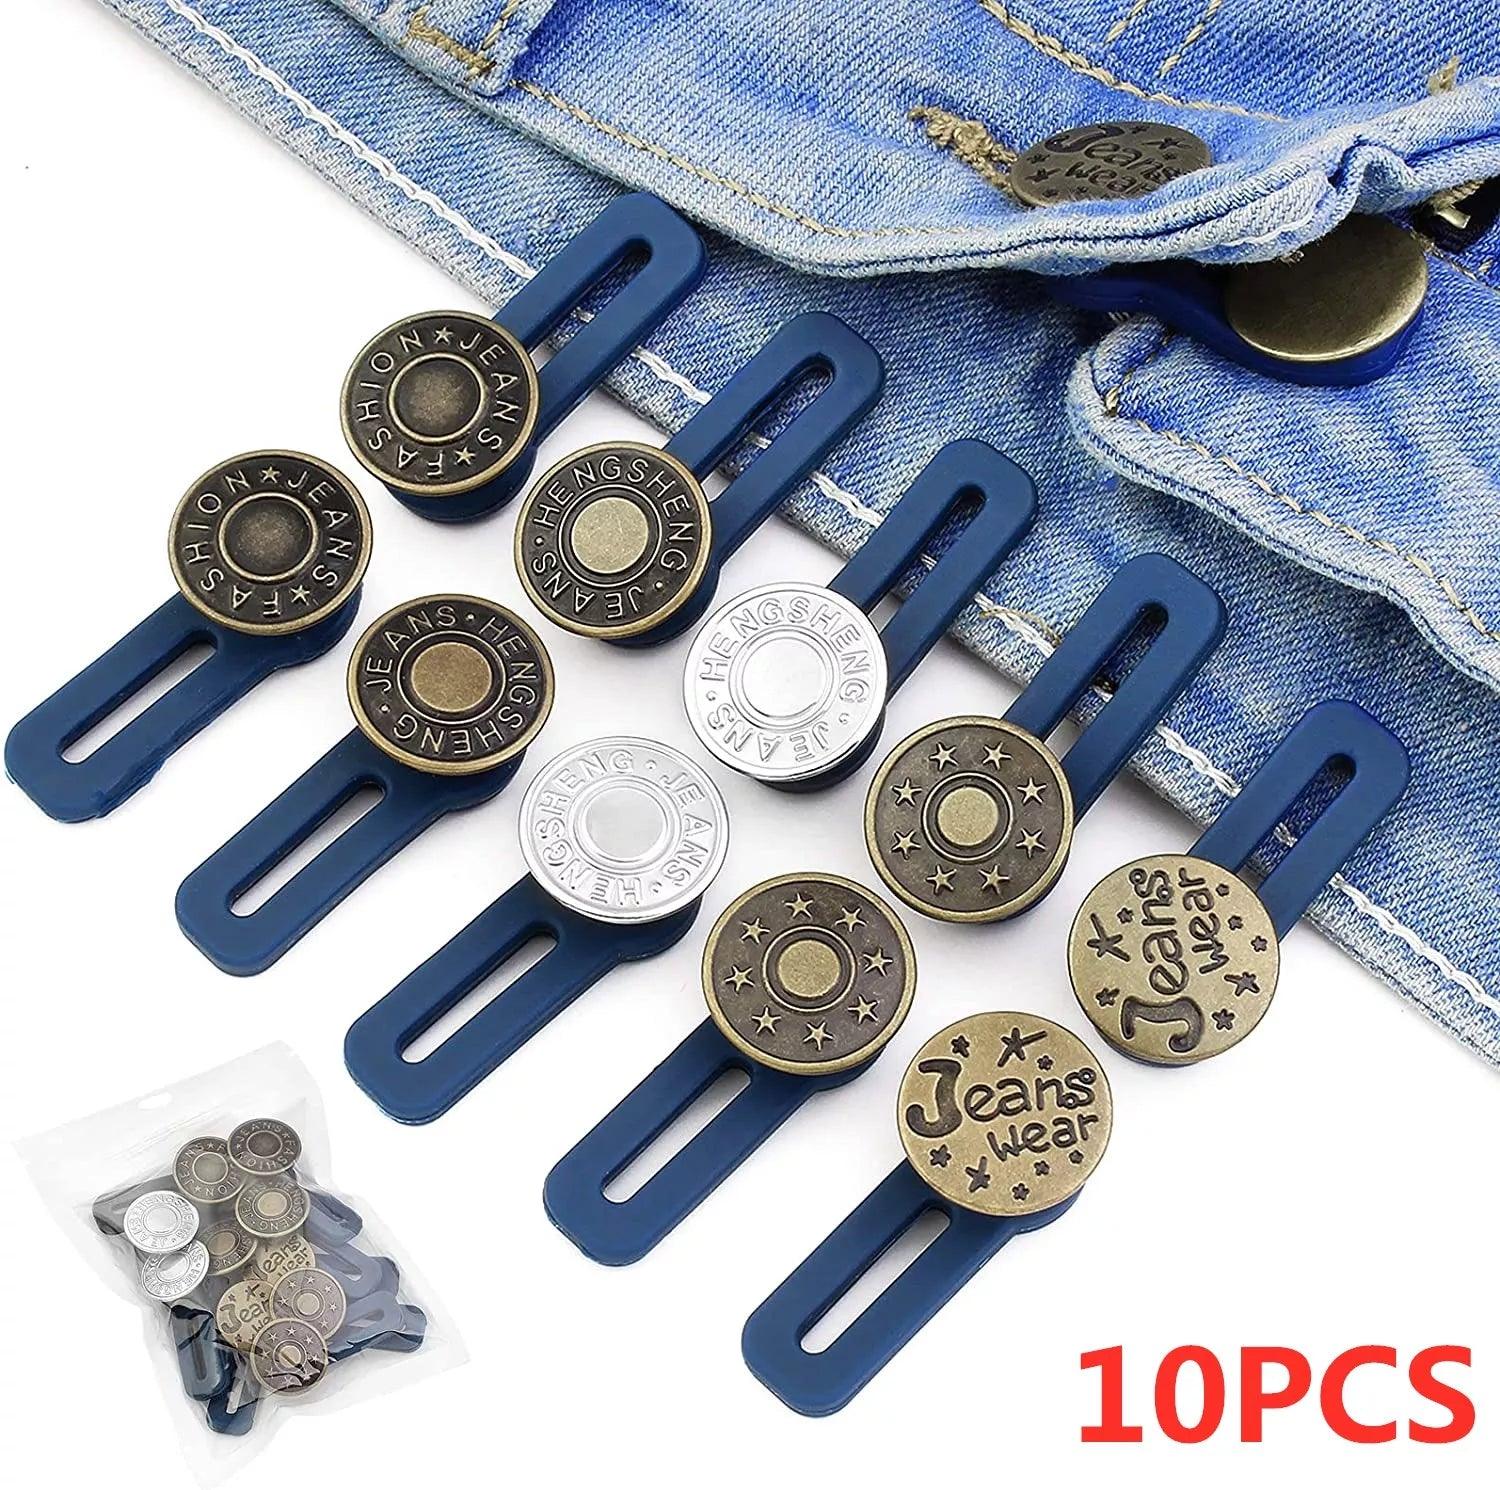 Metal Waistband Extender Set - Adjustable Button Expanders for Pants and Jeans  ourlum.com   